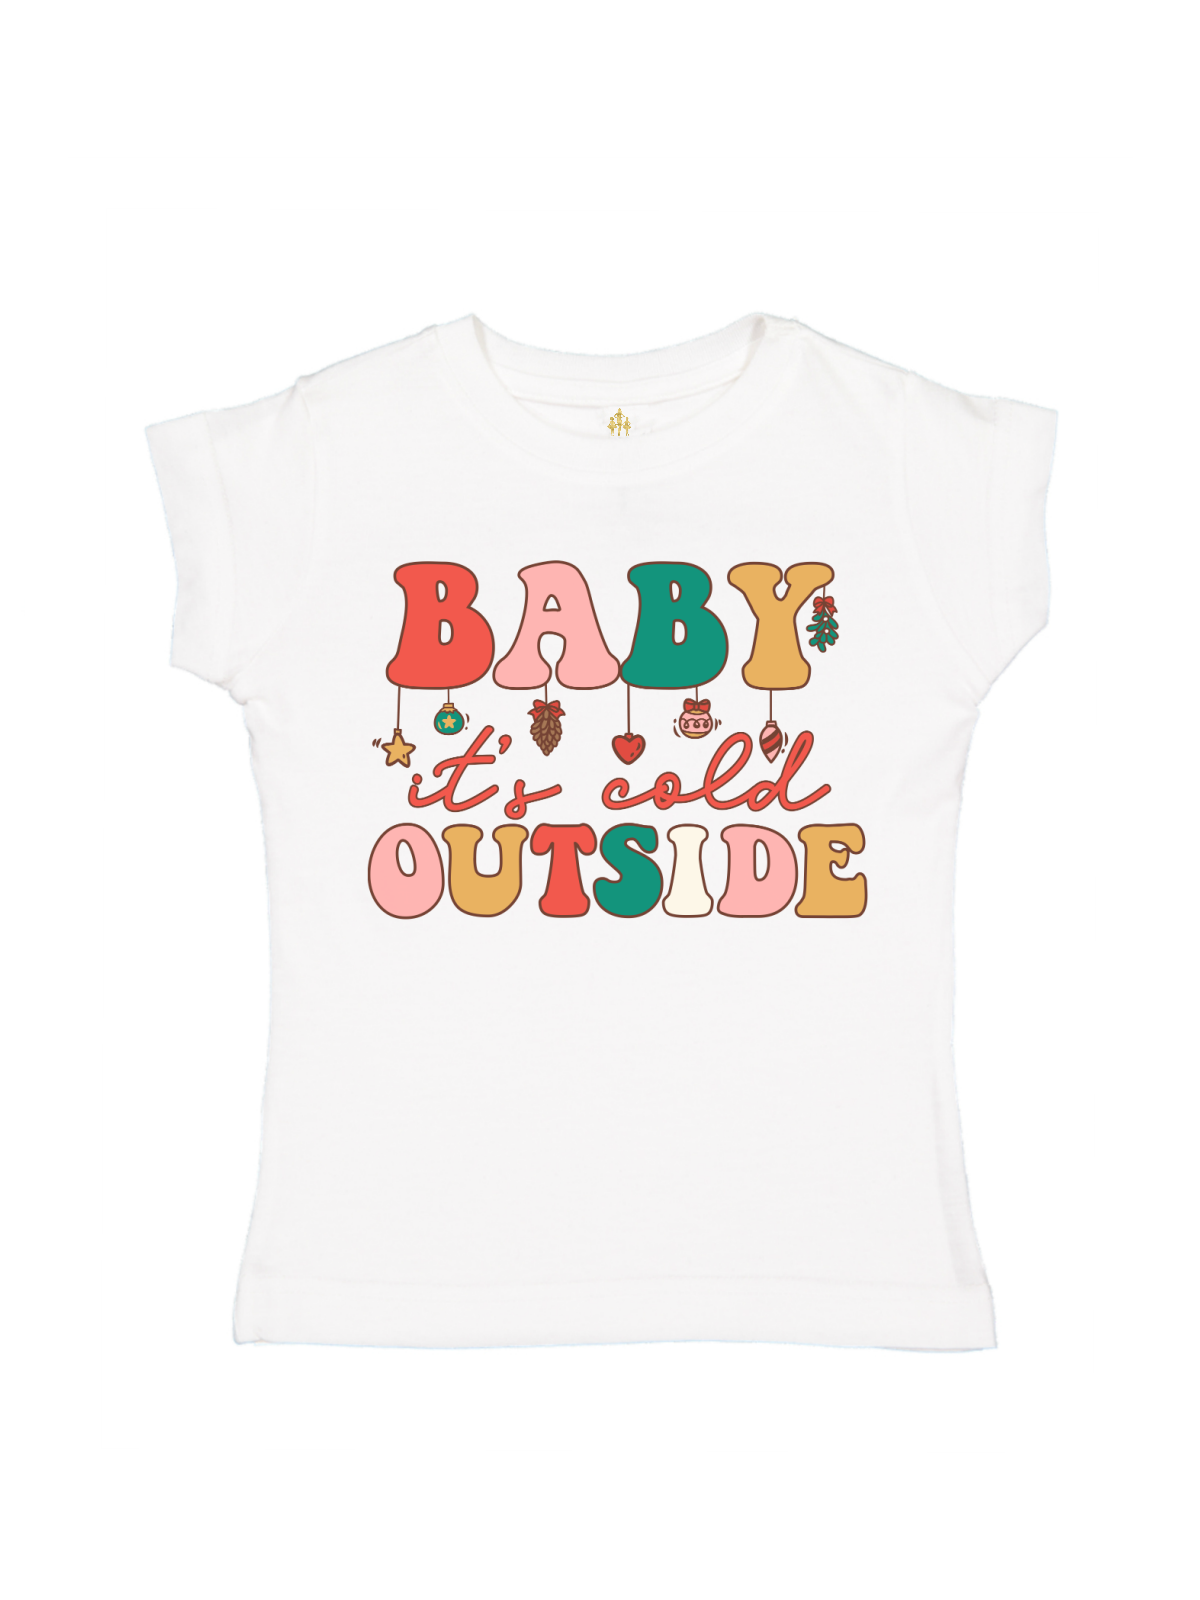 Baby It's Cold Outside Kids Holiday Shirt 